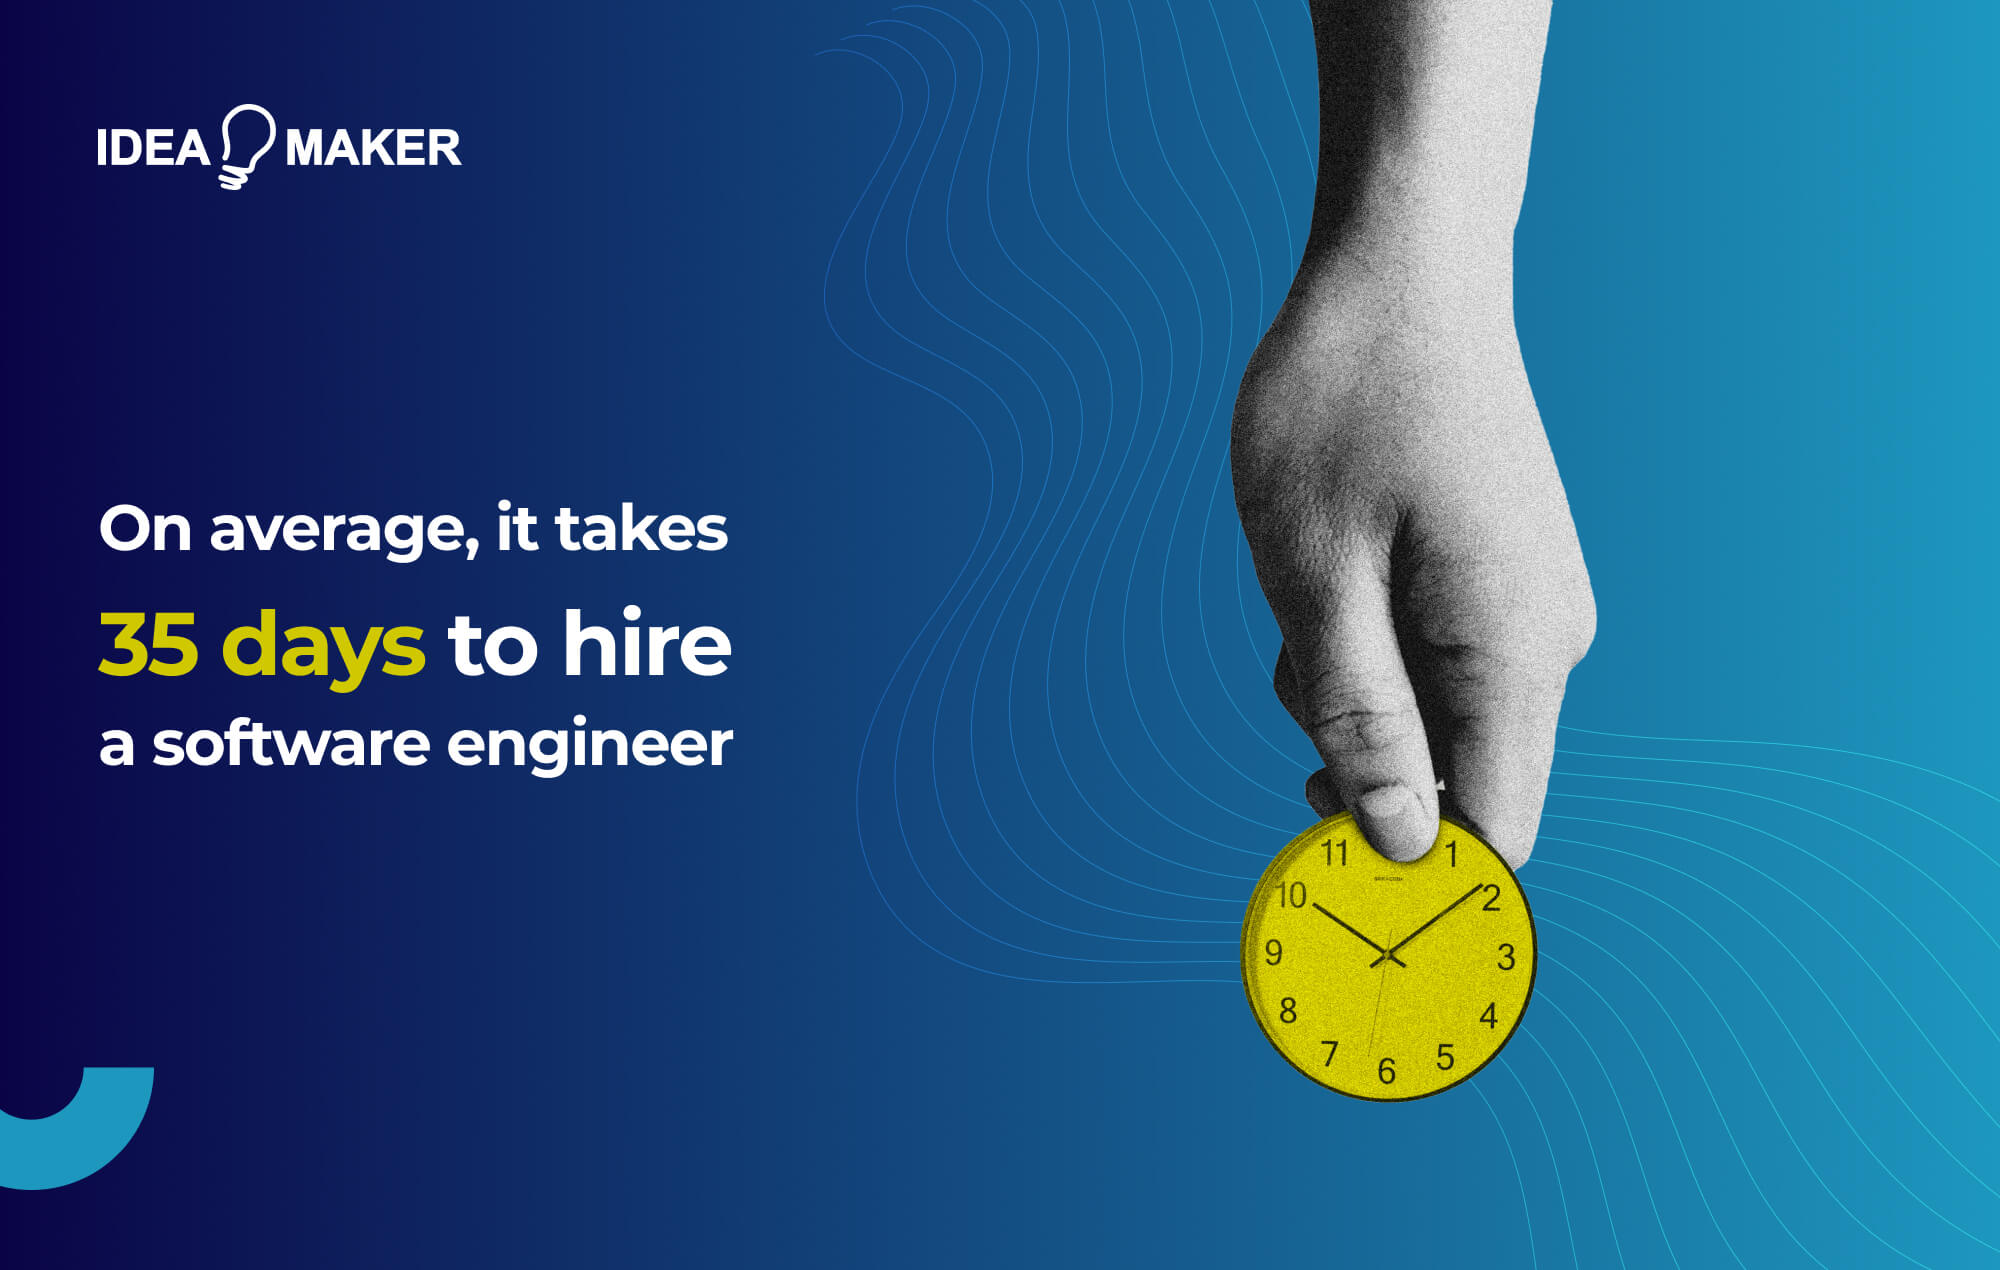 Ideamaker - Saving Time on Hiring Specialists by Gaining Access to World-Class Talent